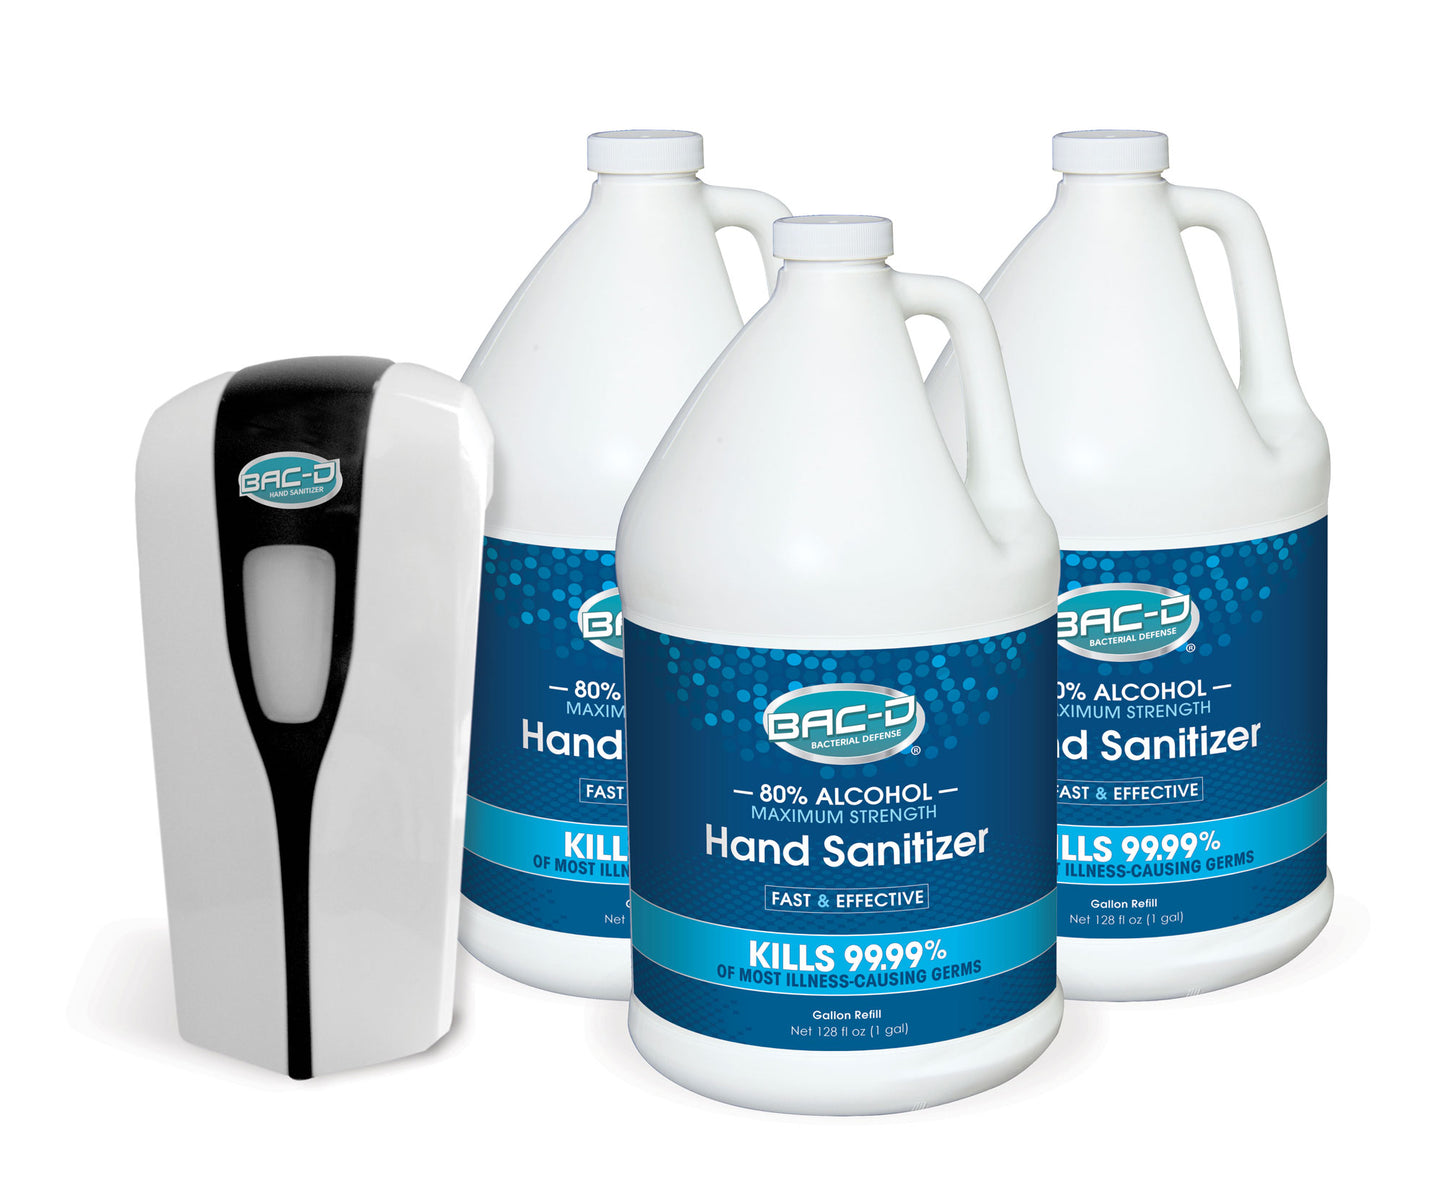 NEW!  BAC-D® ALCOHOL BAC-D® Wall Mount Starter Pack - 1 Wall Mount & 3 One Gallon Alcohol Refills